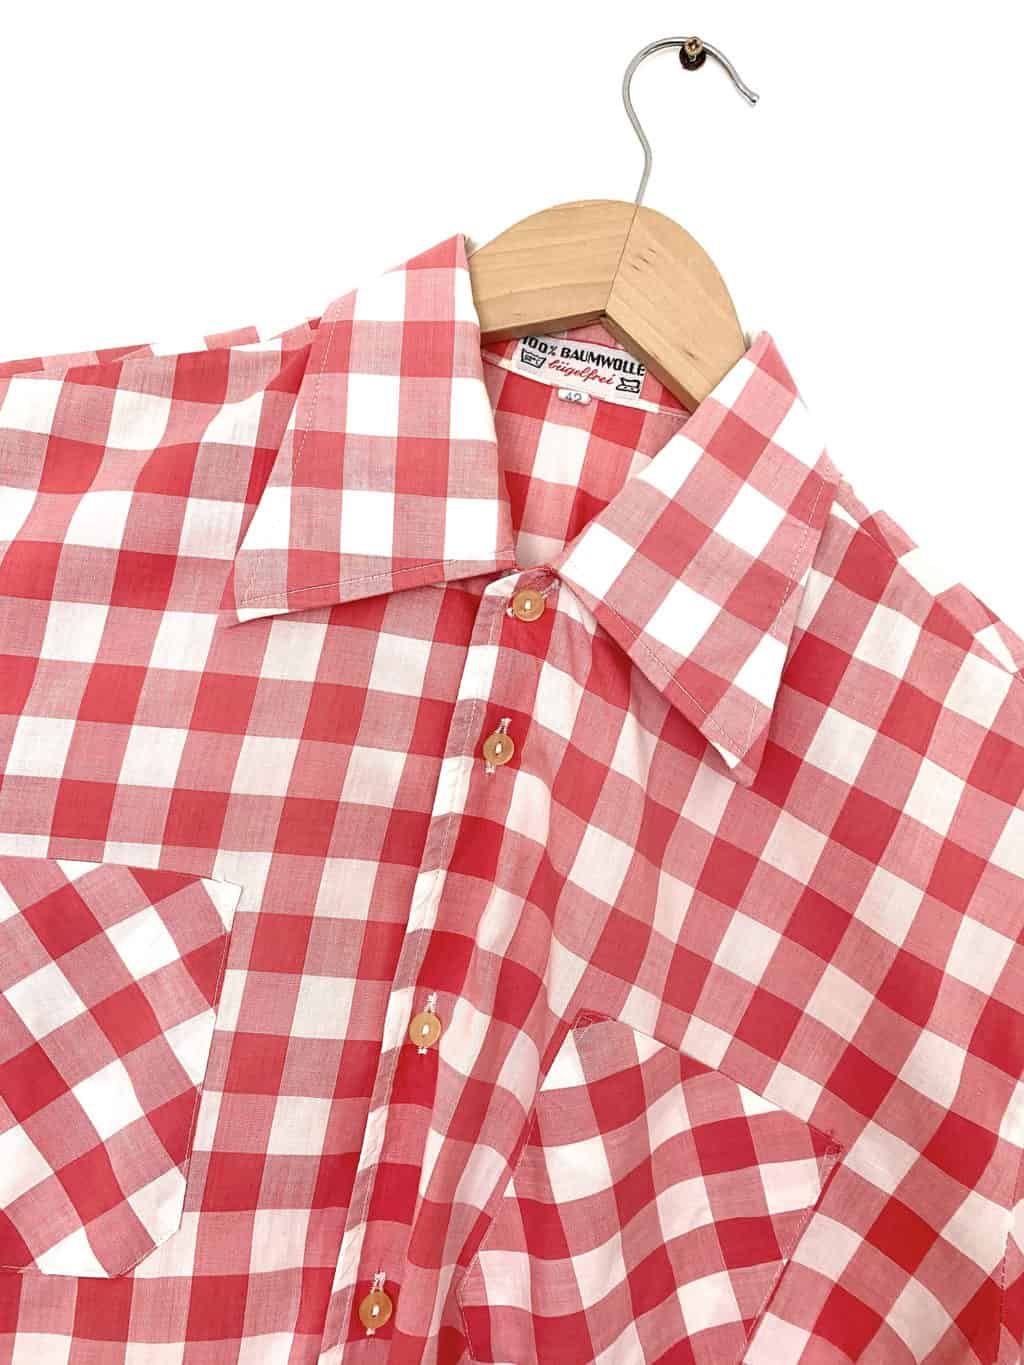 70s Red & White Check Shirt with Big Pointed Collar - L / XL - St Cyr ...